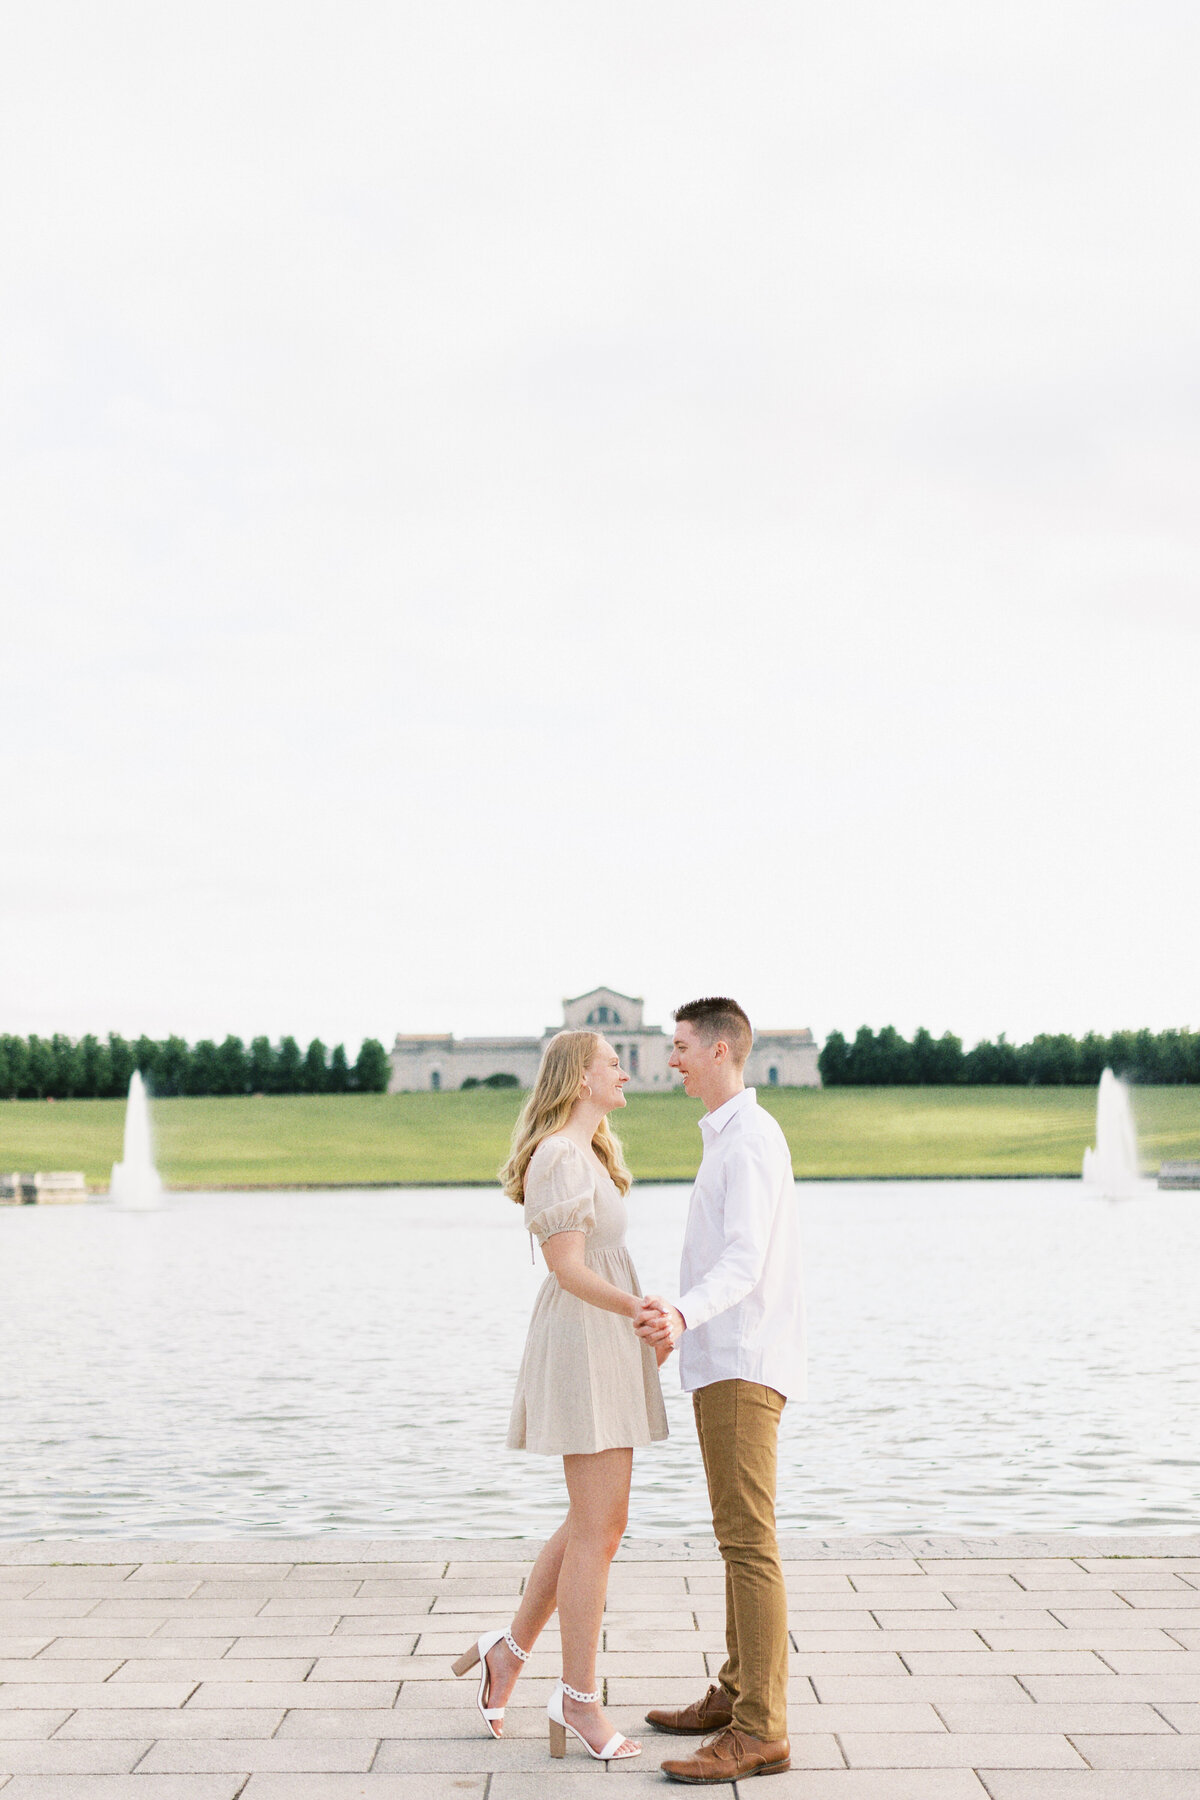 amber-rhea-photography-midwest-wedding-photographer-stl-engagement210A5111